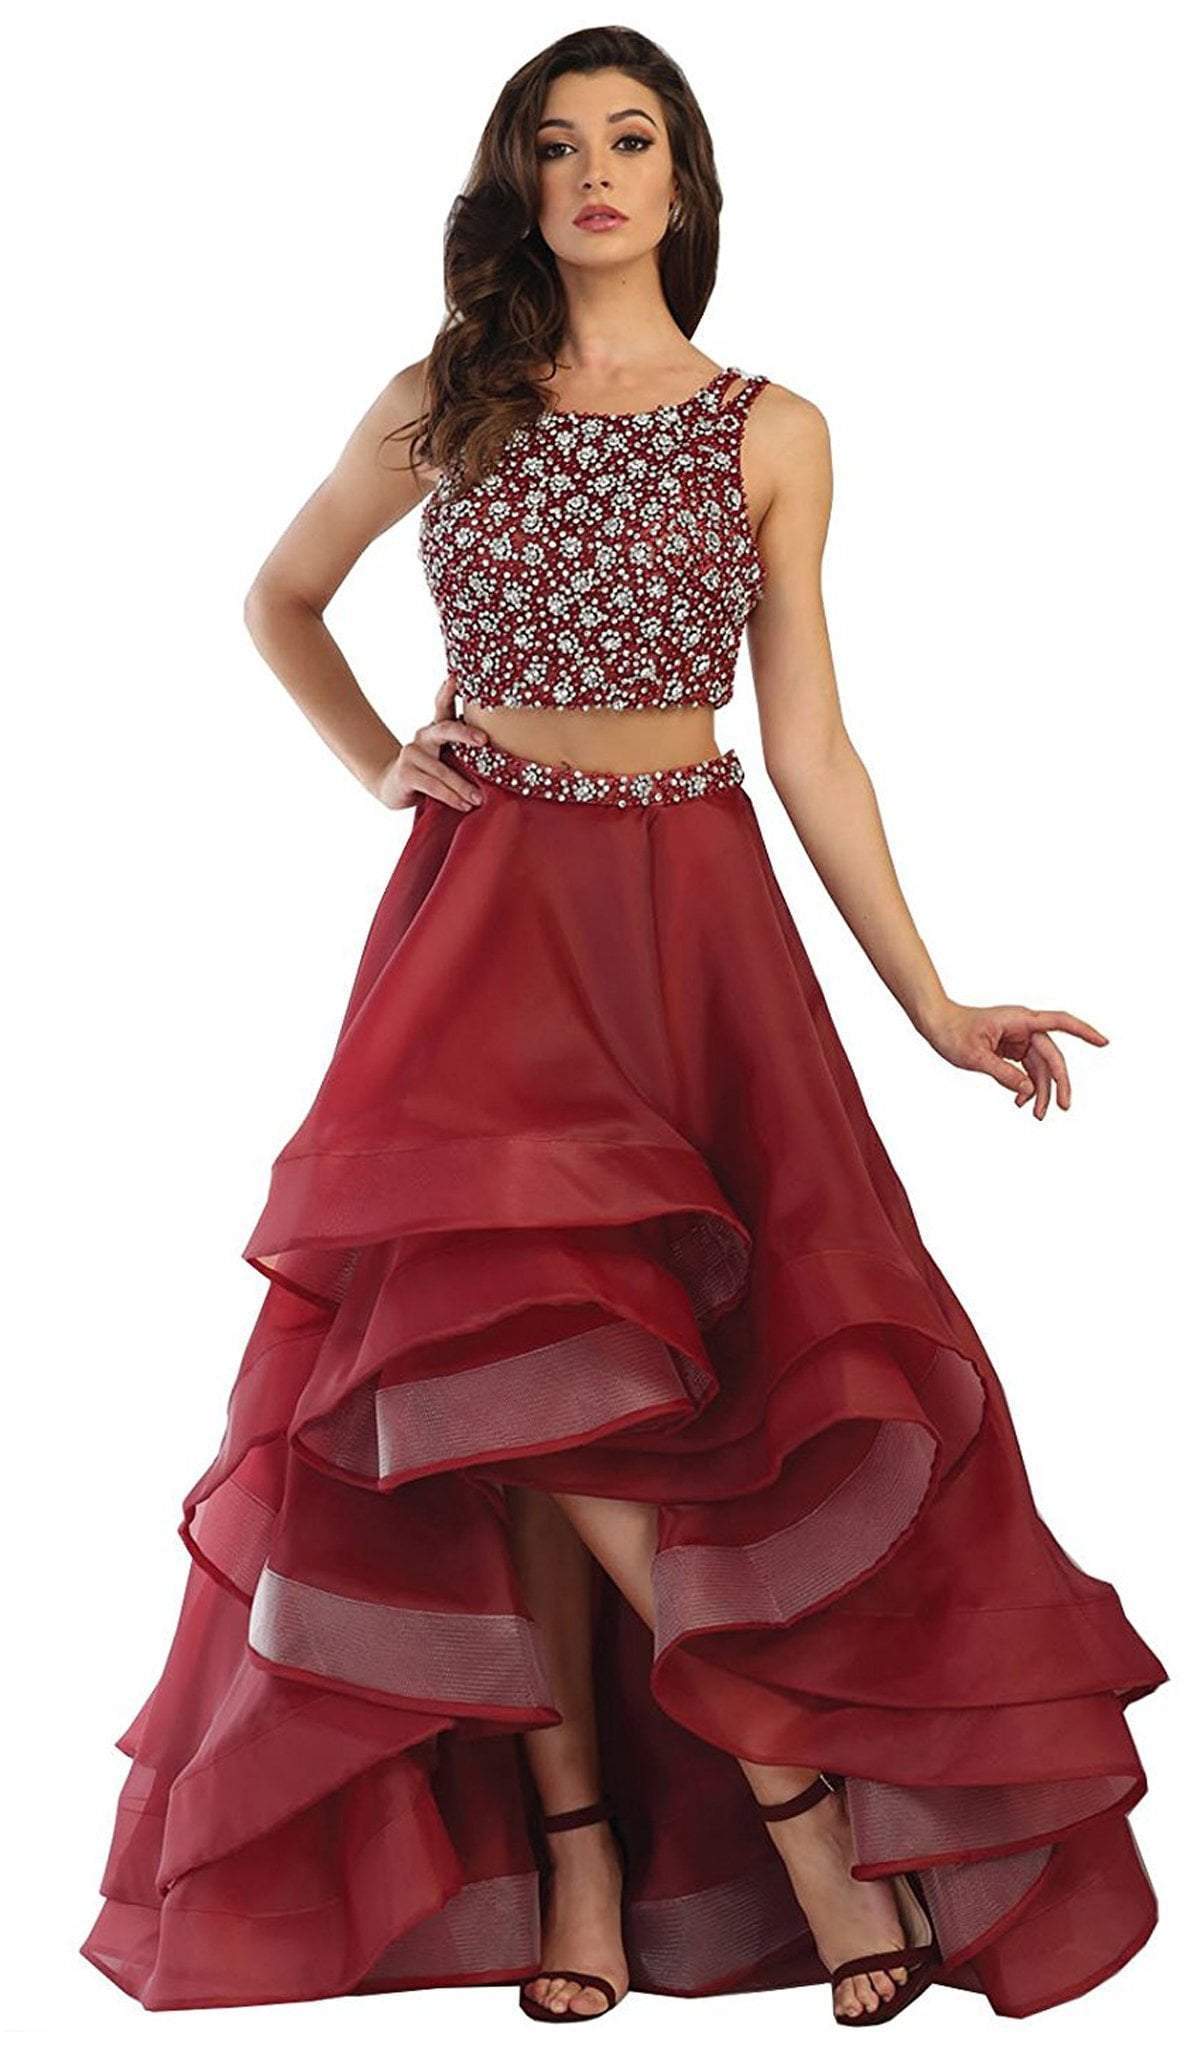 May Queen - RQ7486 Two Piece Bateau A-line Prom Dress In Red